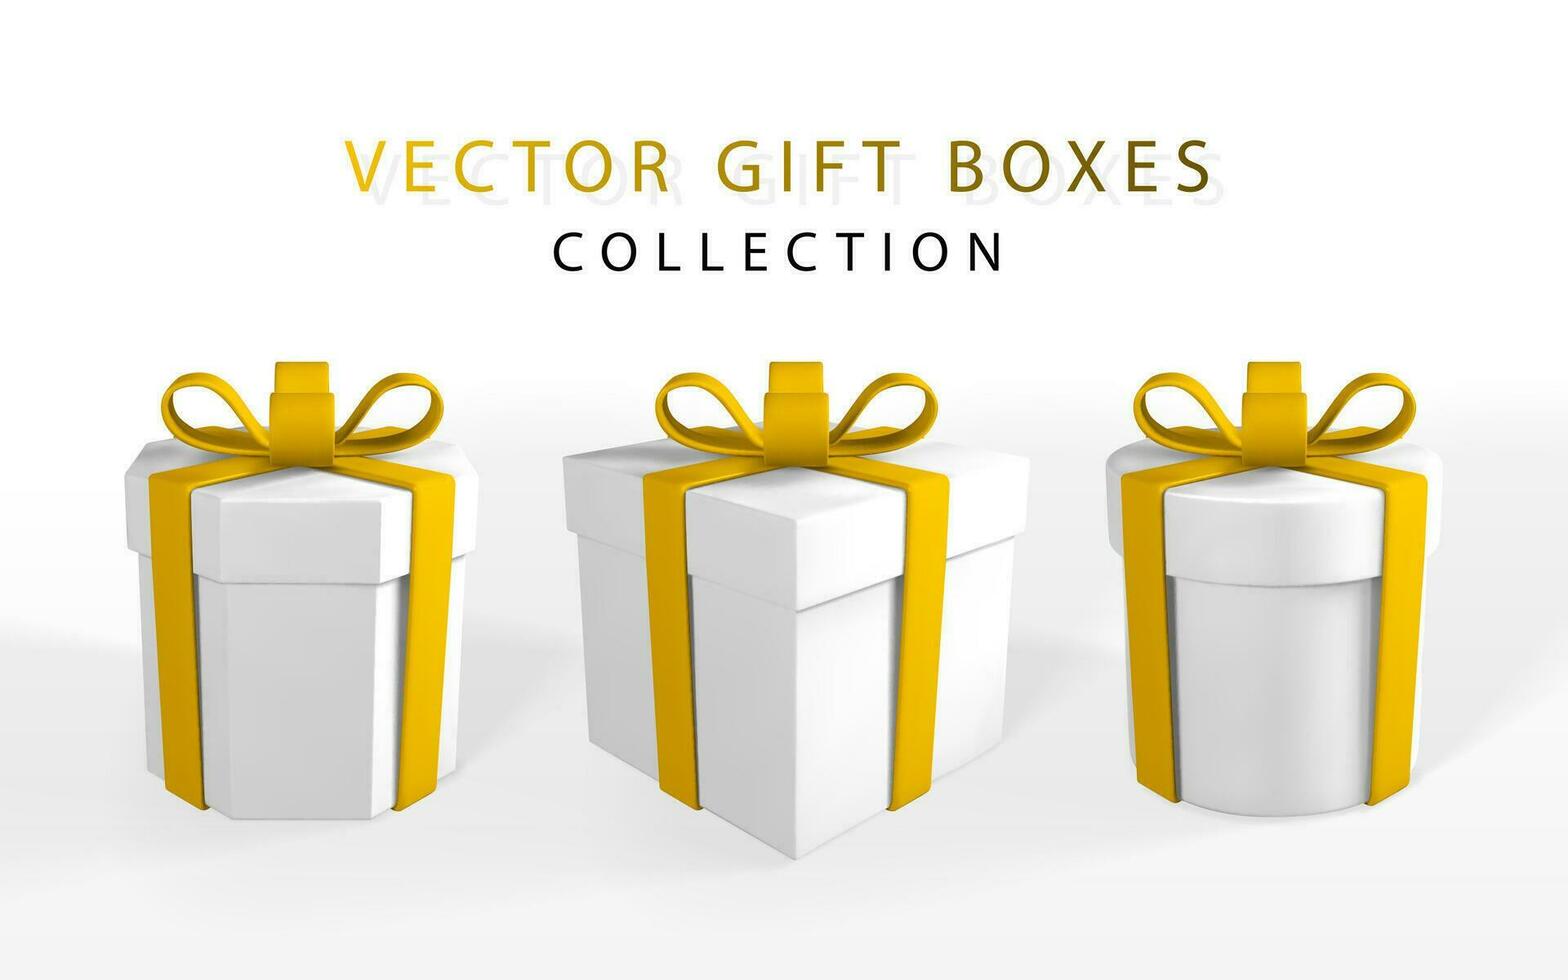 3D render and draw by mesh realistic gift box with bow. Paper box with shadow isolated on white background. Vector illustration